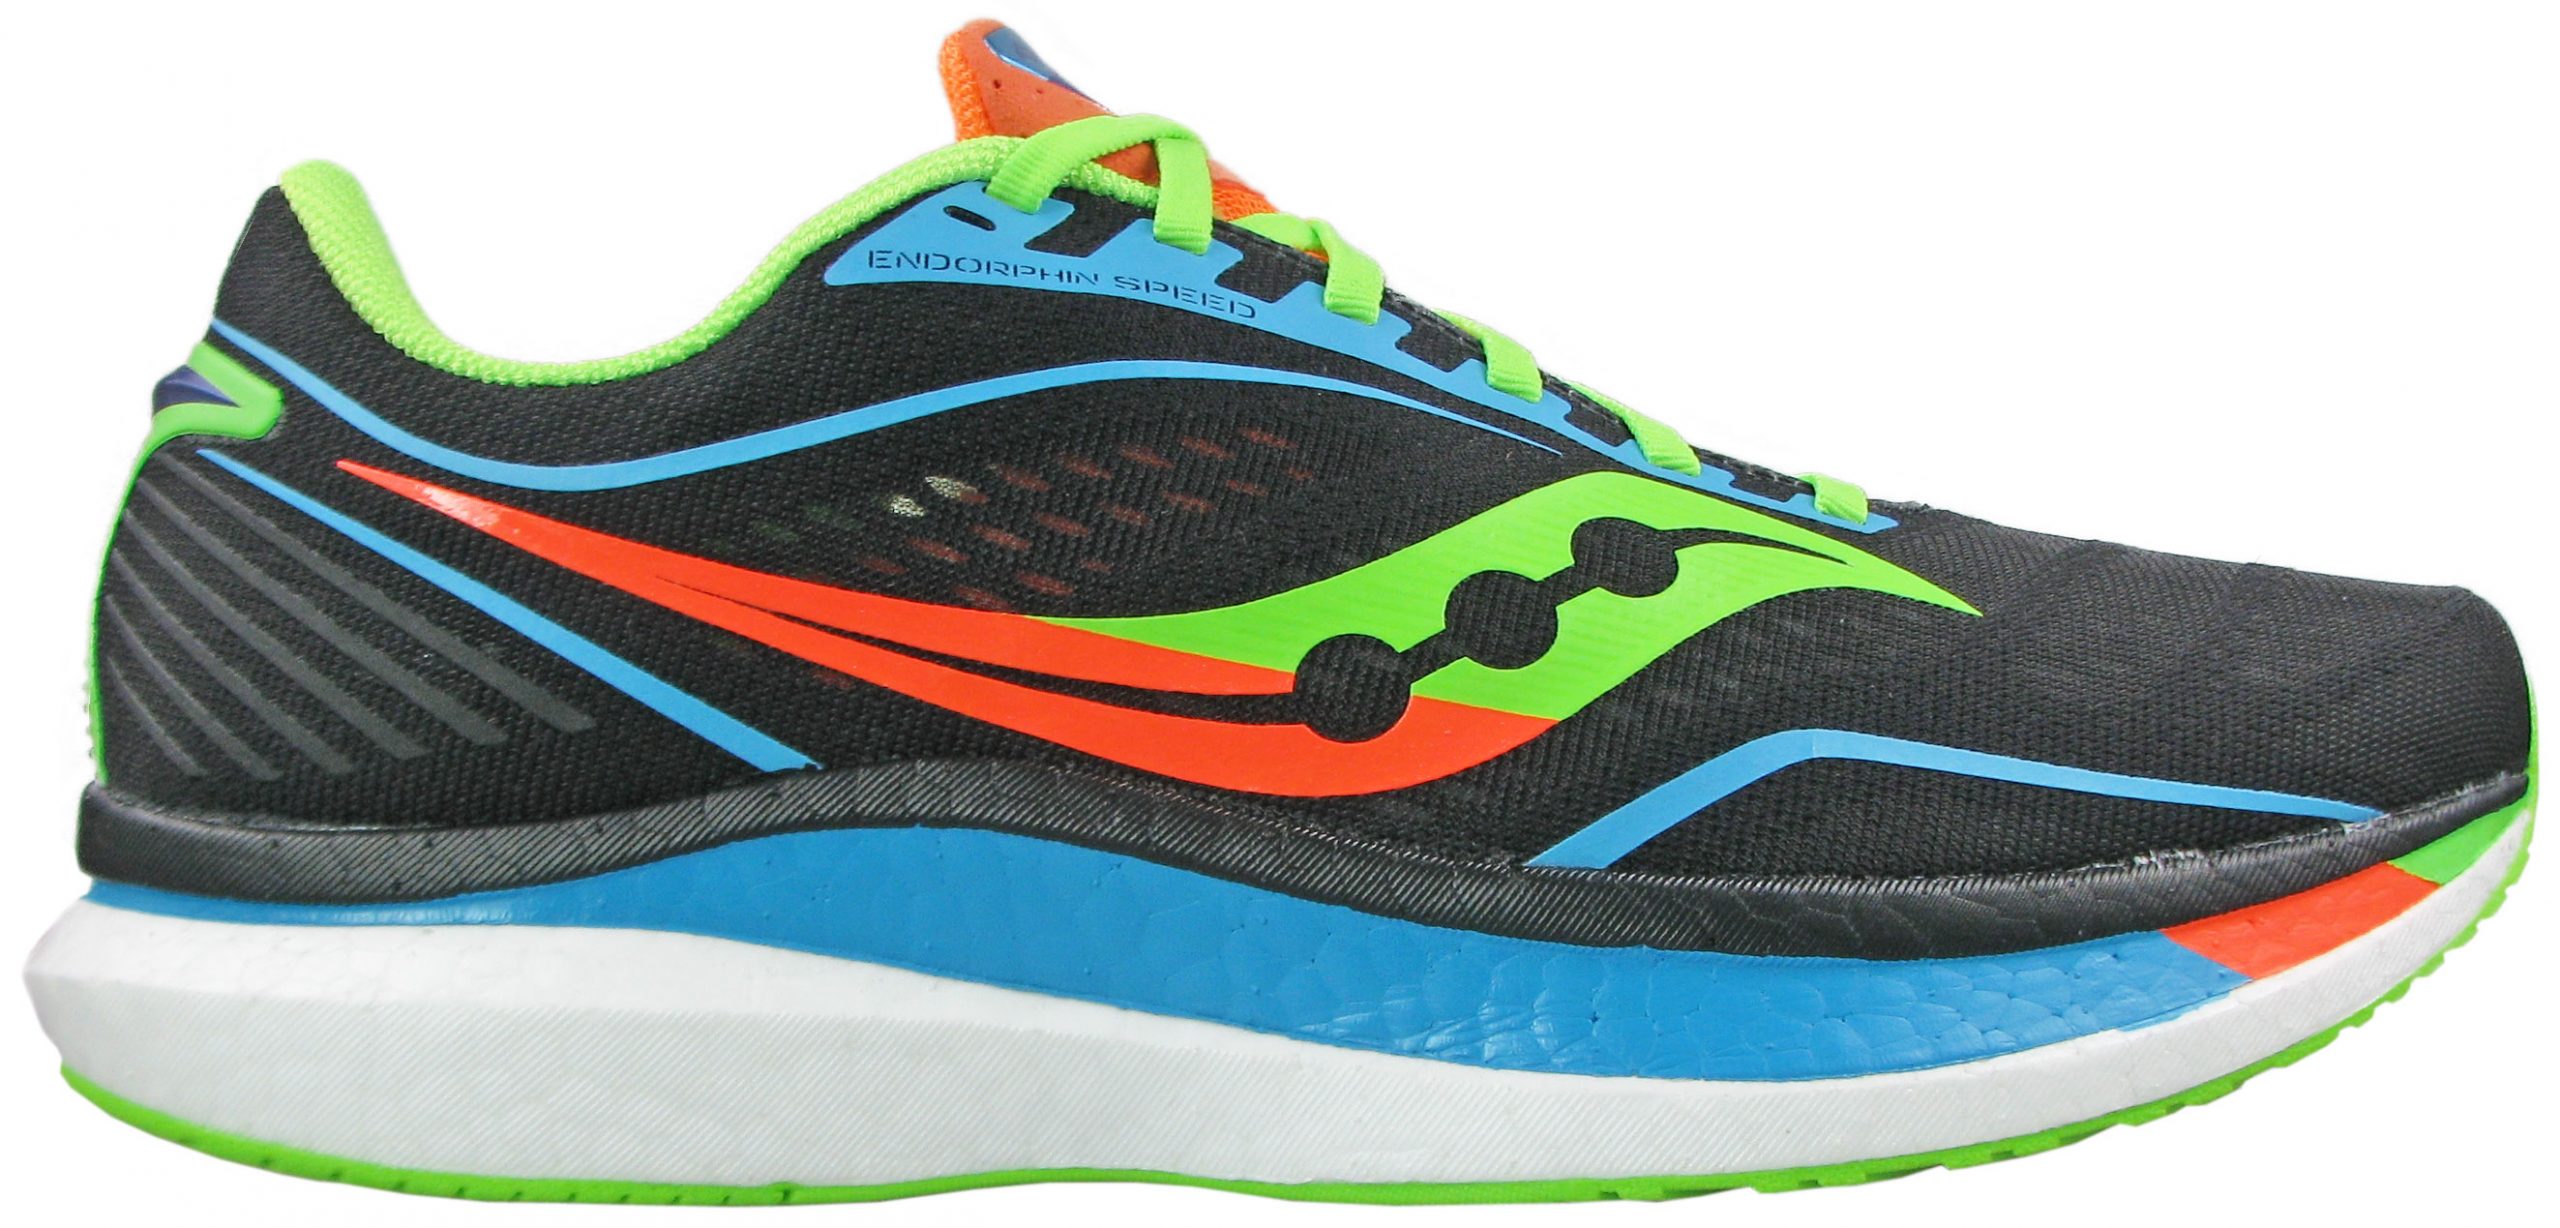 saucony endorphin md4 review